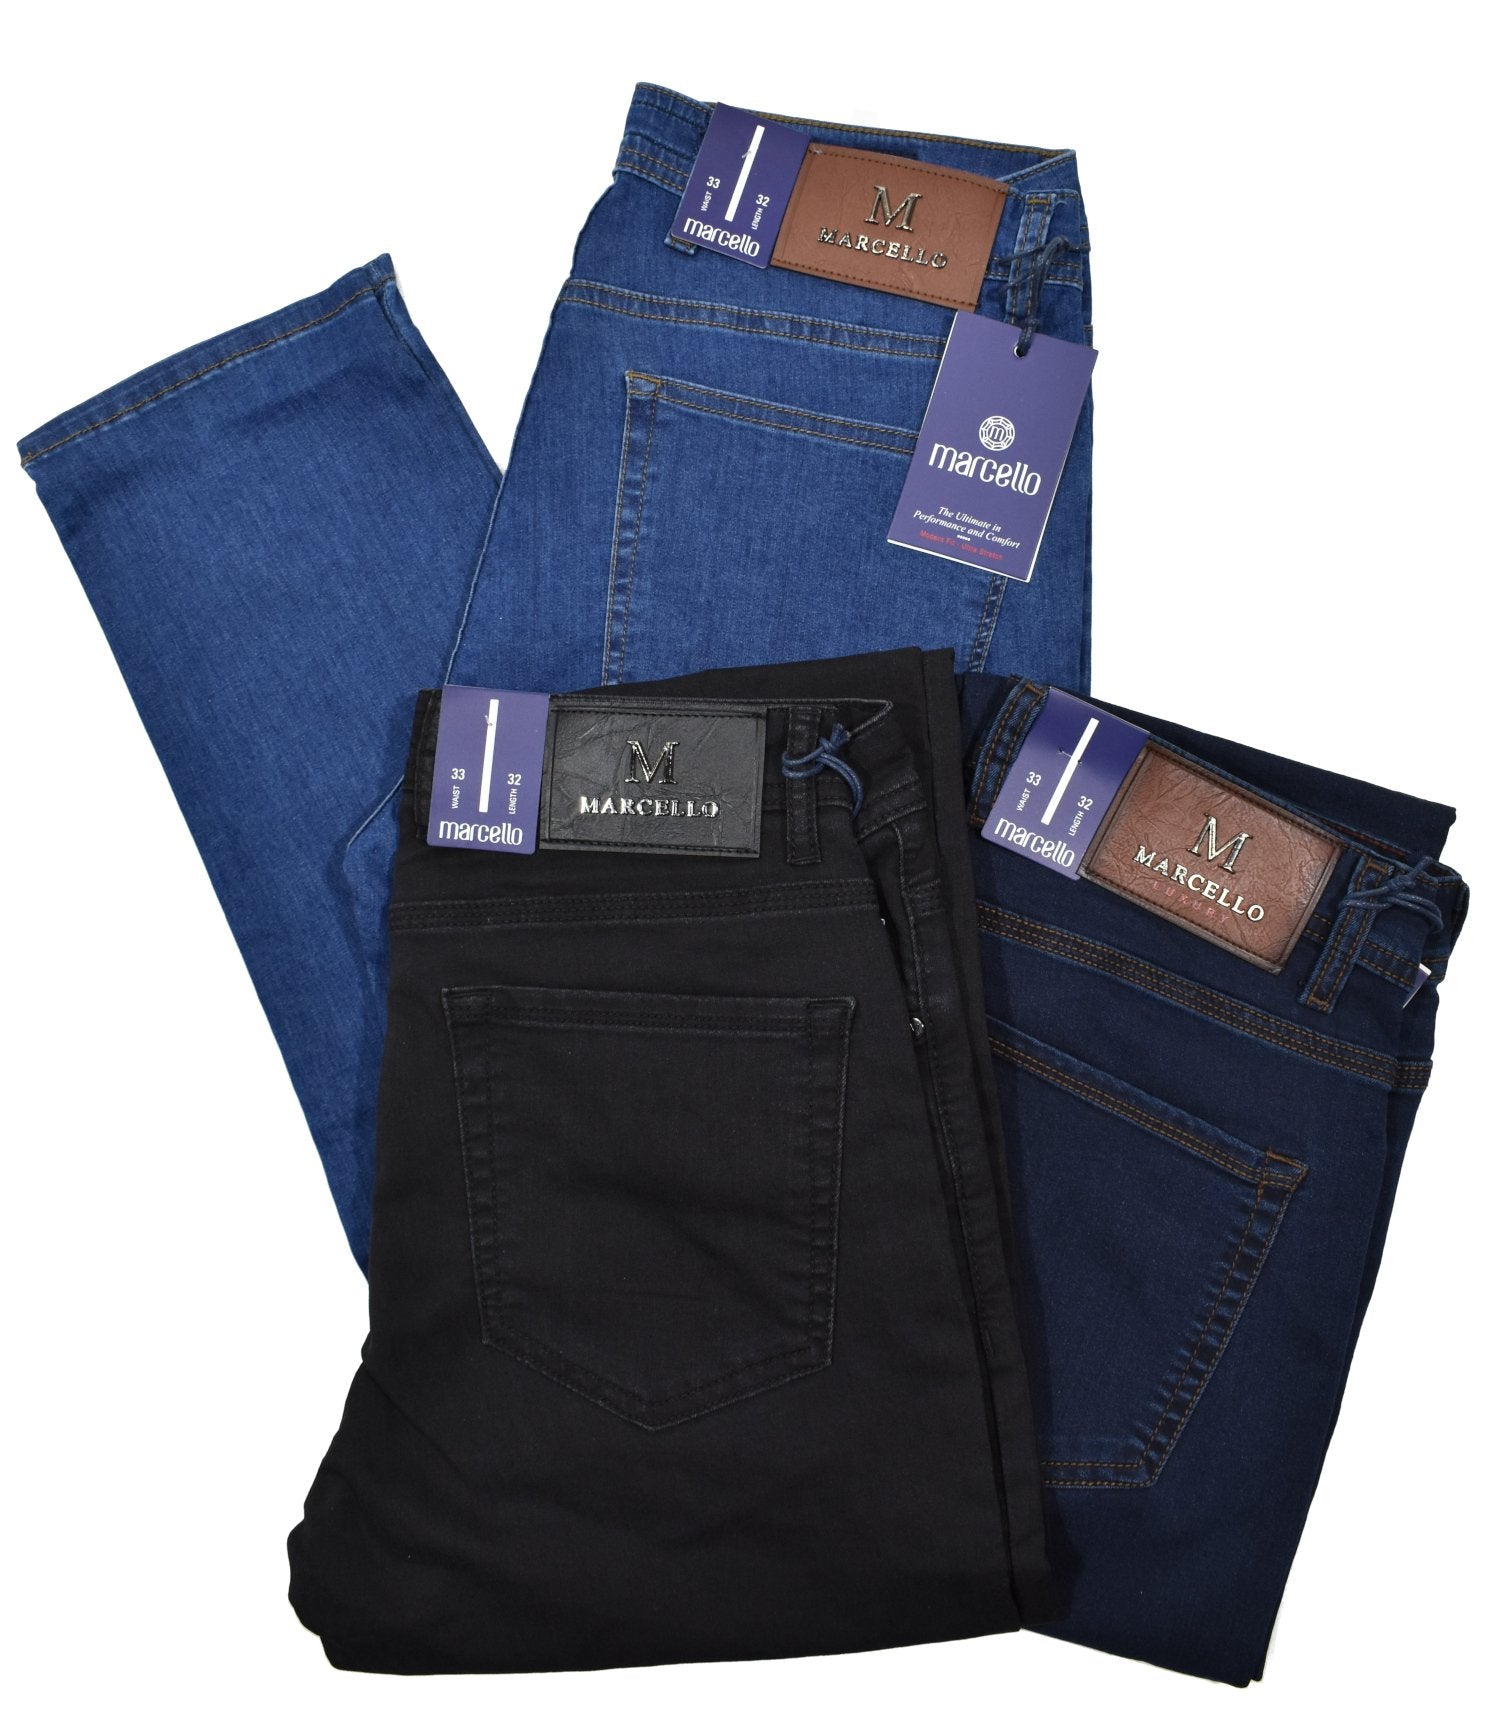 Say goodbye to stiff denim and hello to our LP27 Stretch Lightweight Denim. These jeans feature an ultra-light cotton-elastin fabric that moves with your body for exceptional comfort. The&nbsp;slimmer fit offers a&nbsp;contemporary leg and a relaxed look you'll love! Amazingly comfortable and stylish - what more could you want? A Marcello Exclusive.